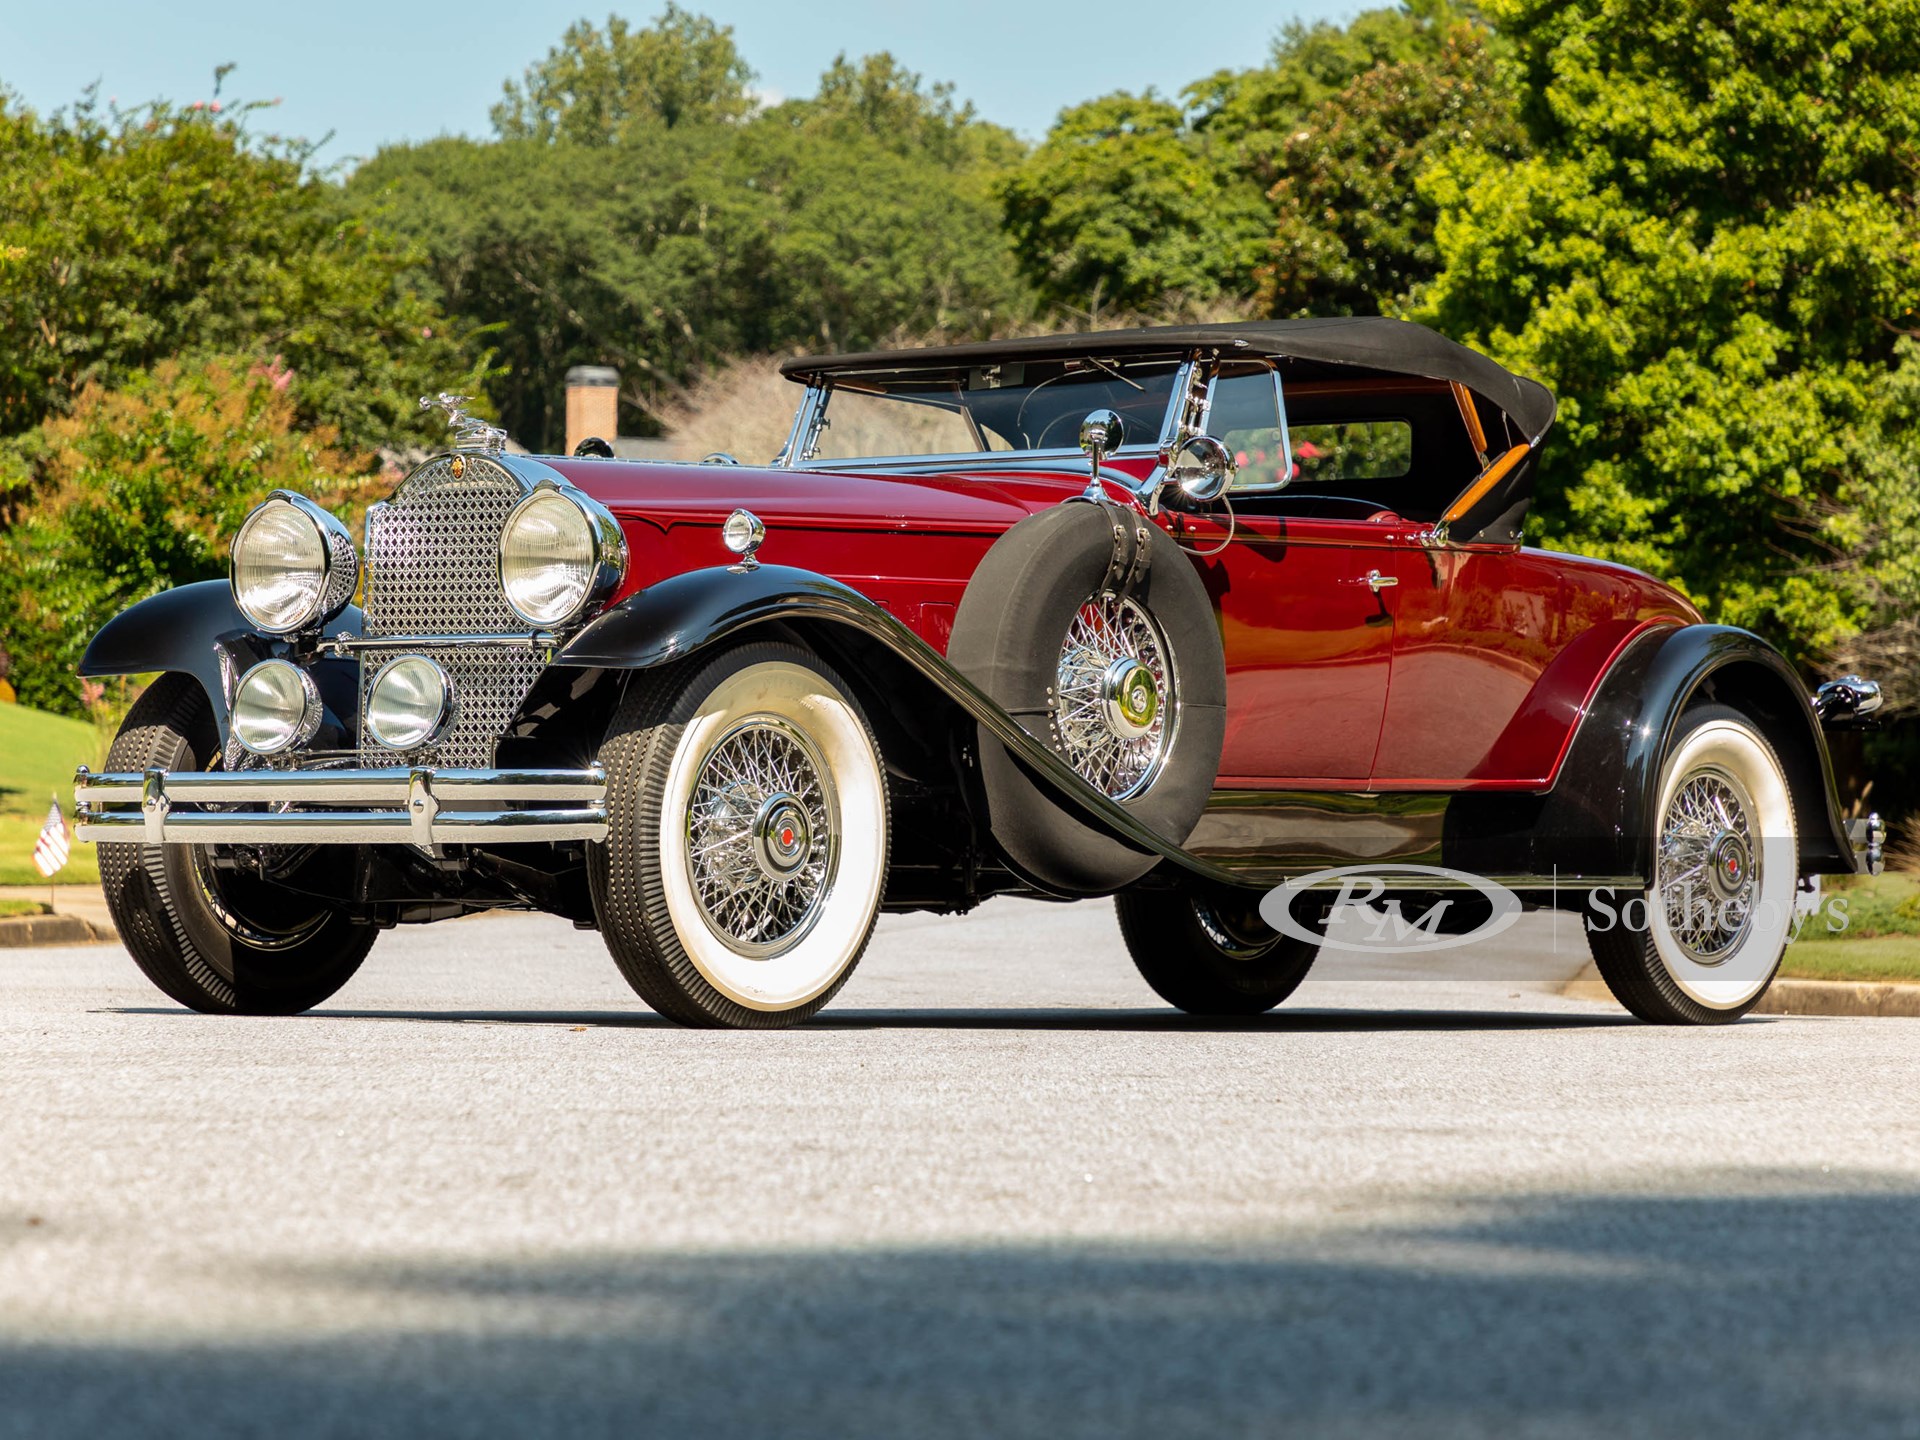 1930 Packard 745 Deluxe Eight Roadster by LeBaron (Alex Stewart ©2021 Courtesy of RM Sotheby’s)